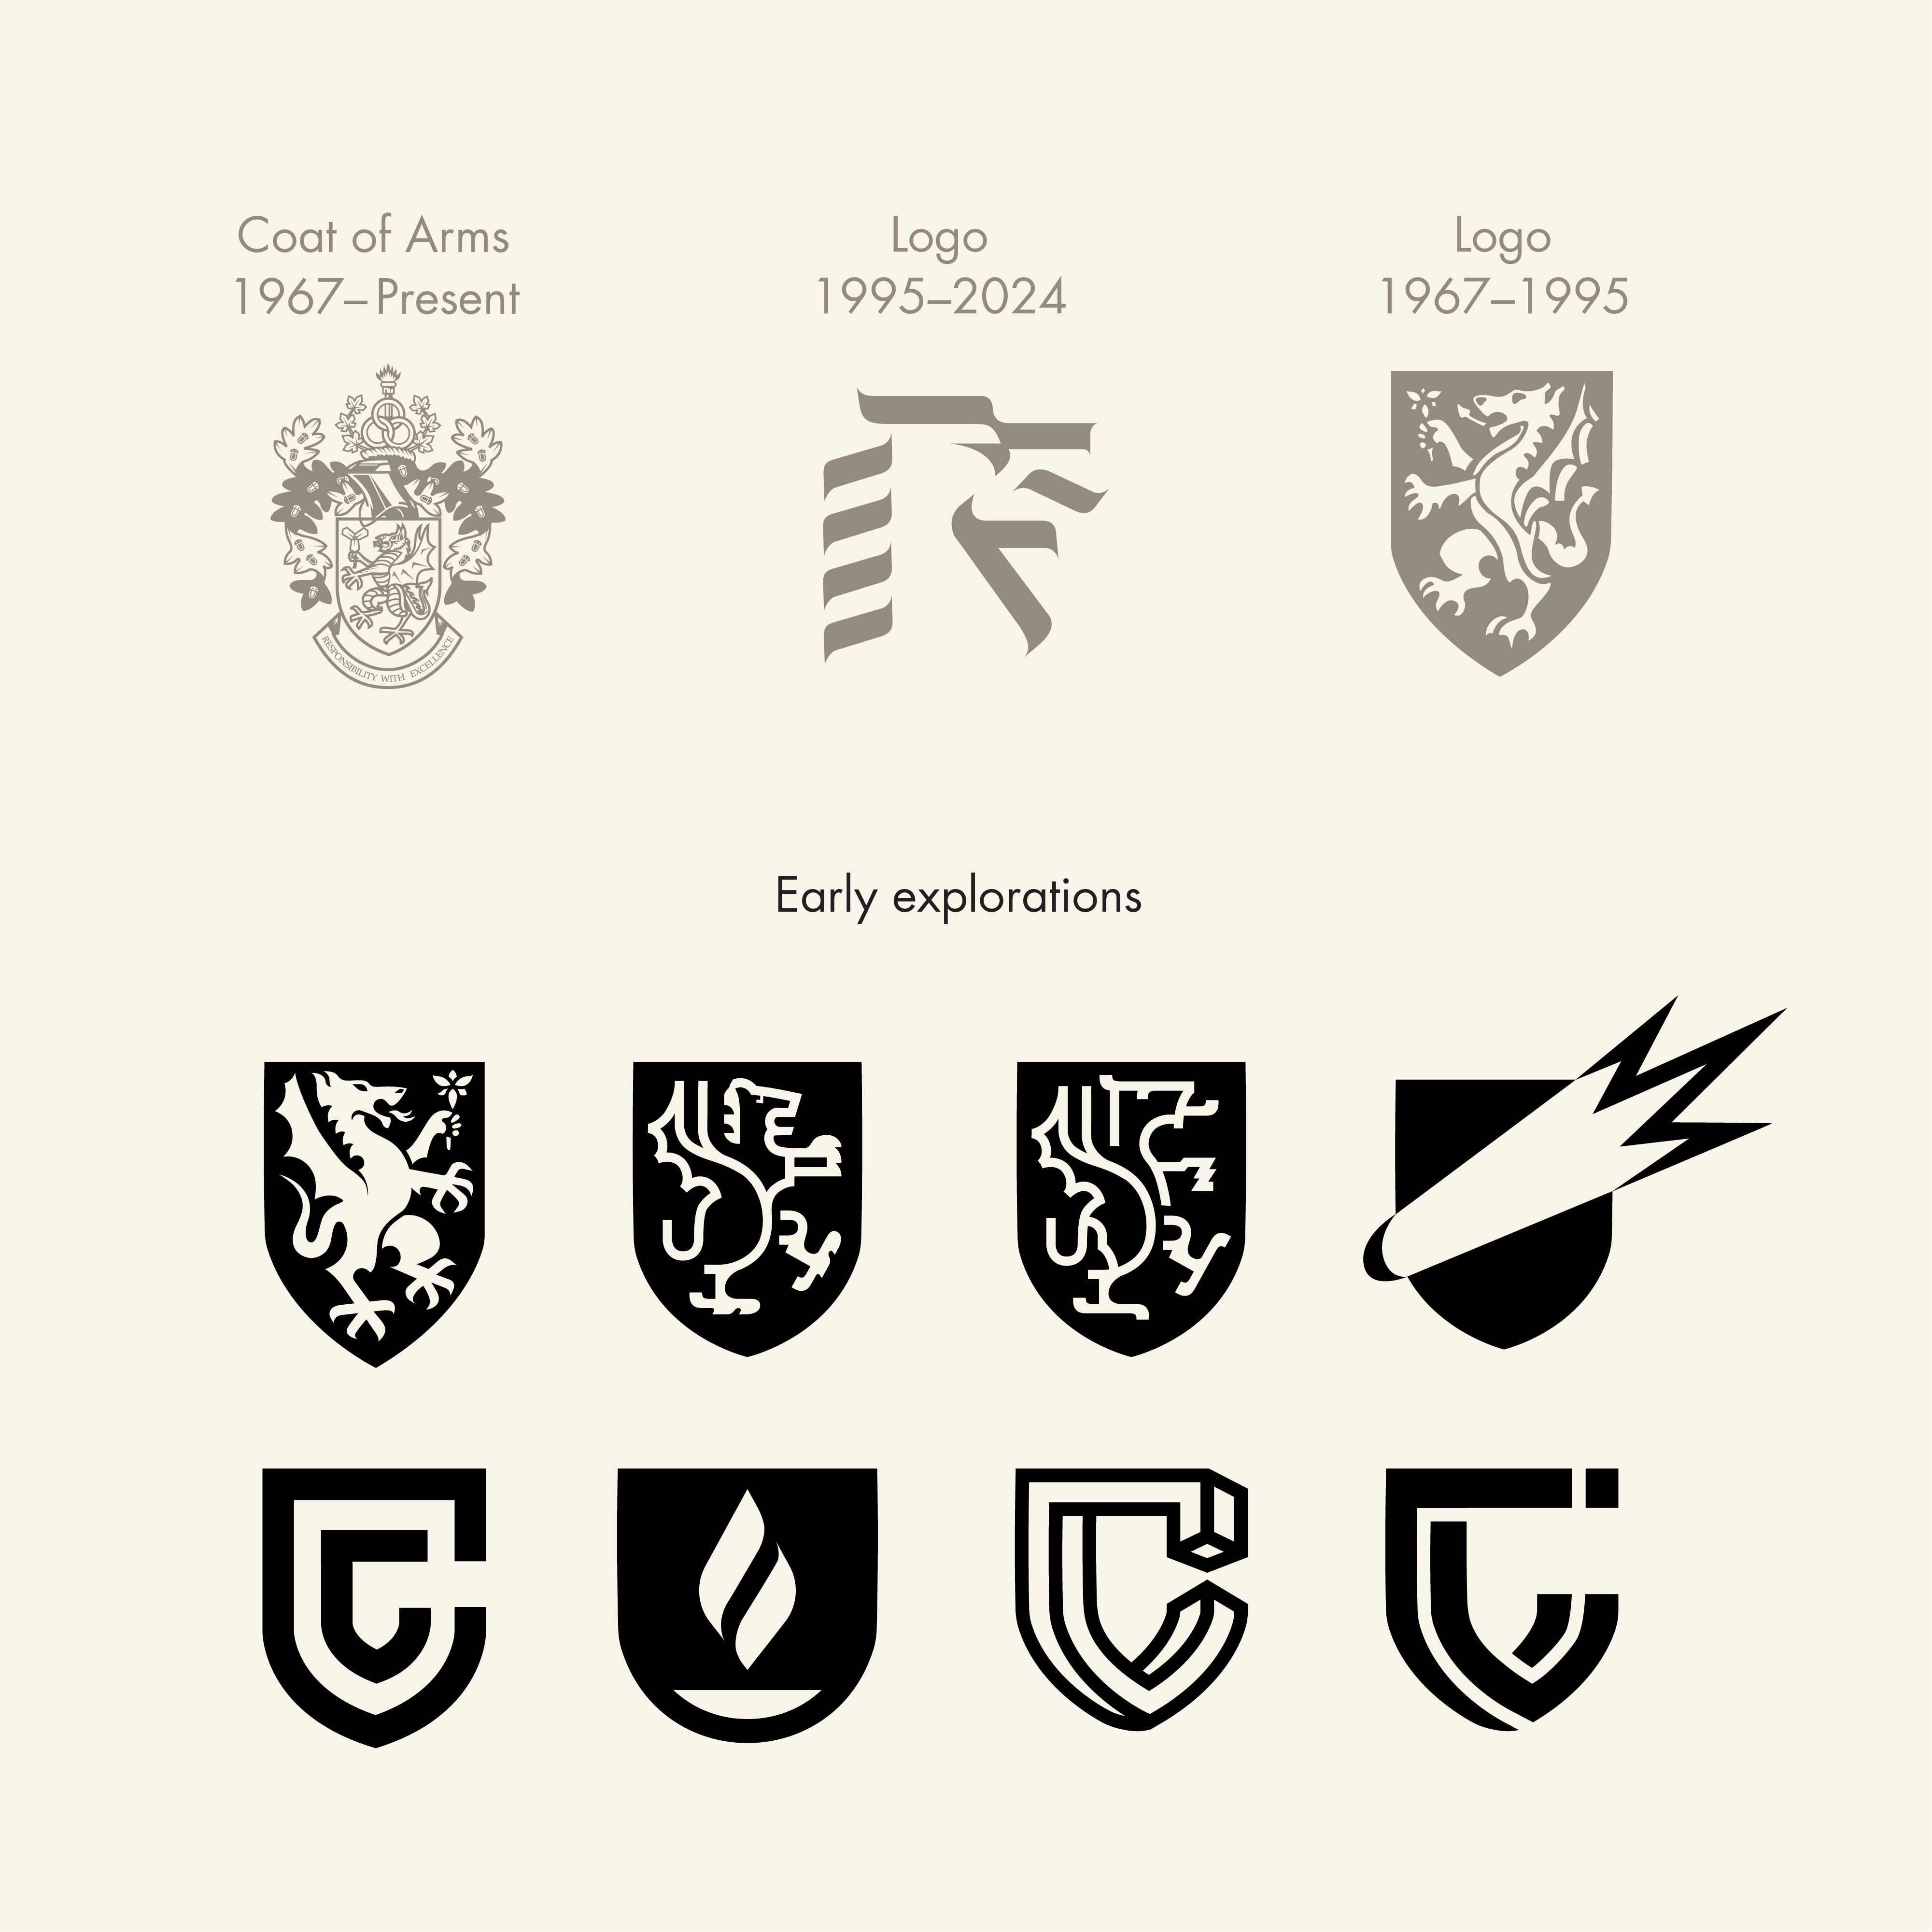 Cambrian College logo from 1967 displayed with the the logo designed in 1995 by Ron Beltrame and the current Coat of Arms. Below are early explorations of new logos featuring dragons in shields, flames in a shield, a bolide in a shield and a shield made to look like a letter C.